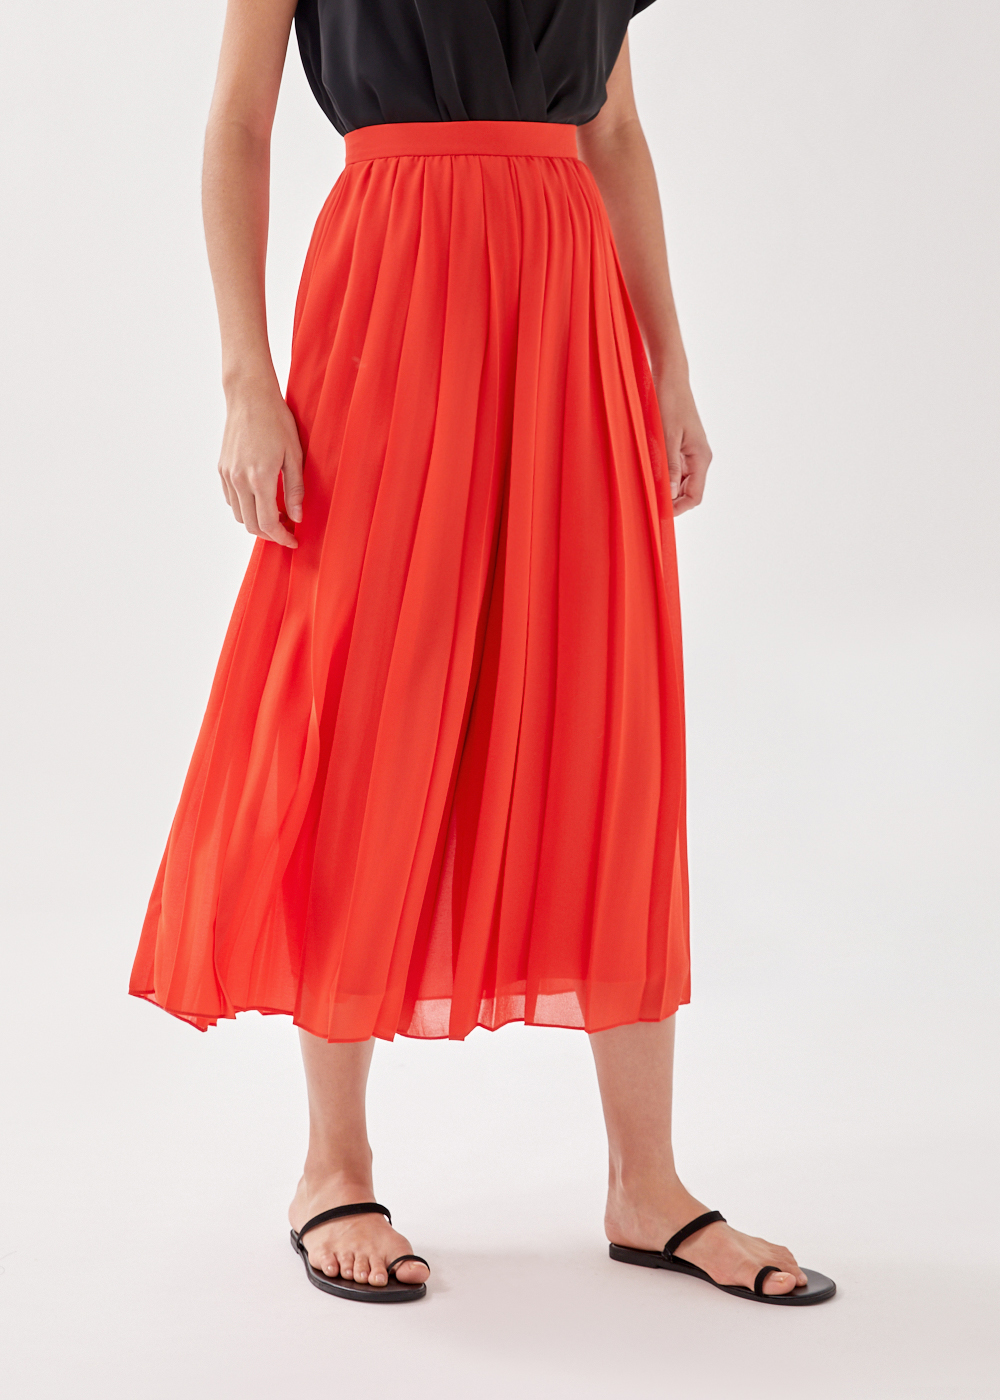 Buy Livvy Pleated Culottes @ Love, Bonito | Shop Women's Fashion Online